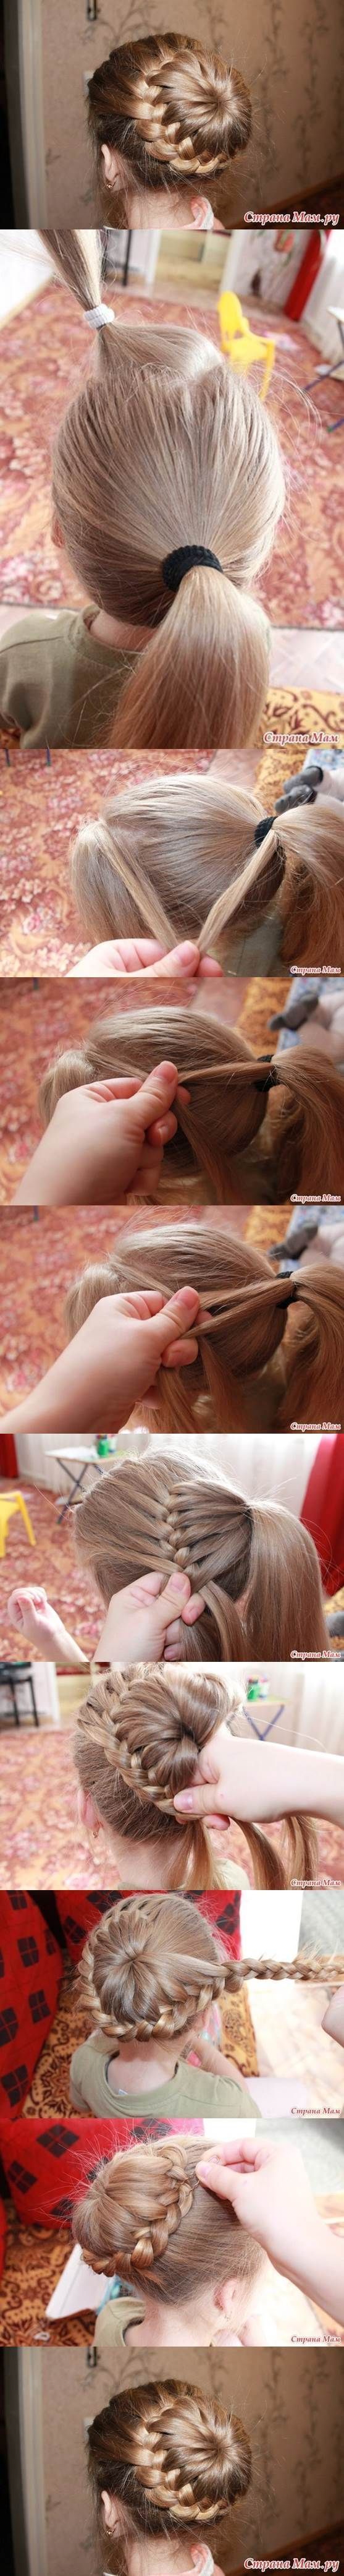 OMG IM SO TRYING THIS ON MY DAUGHTER (: